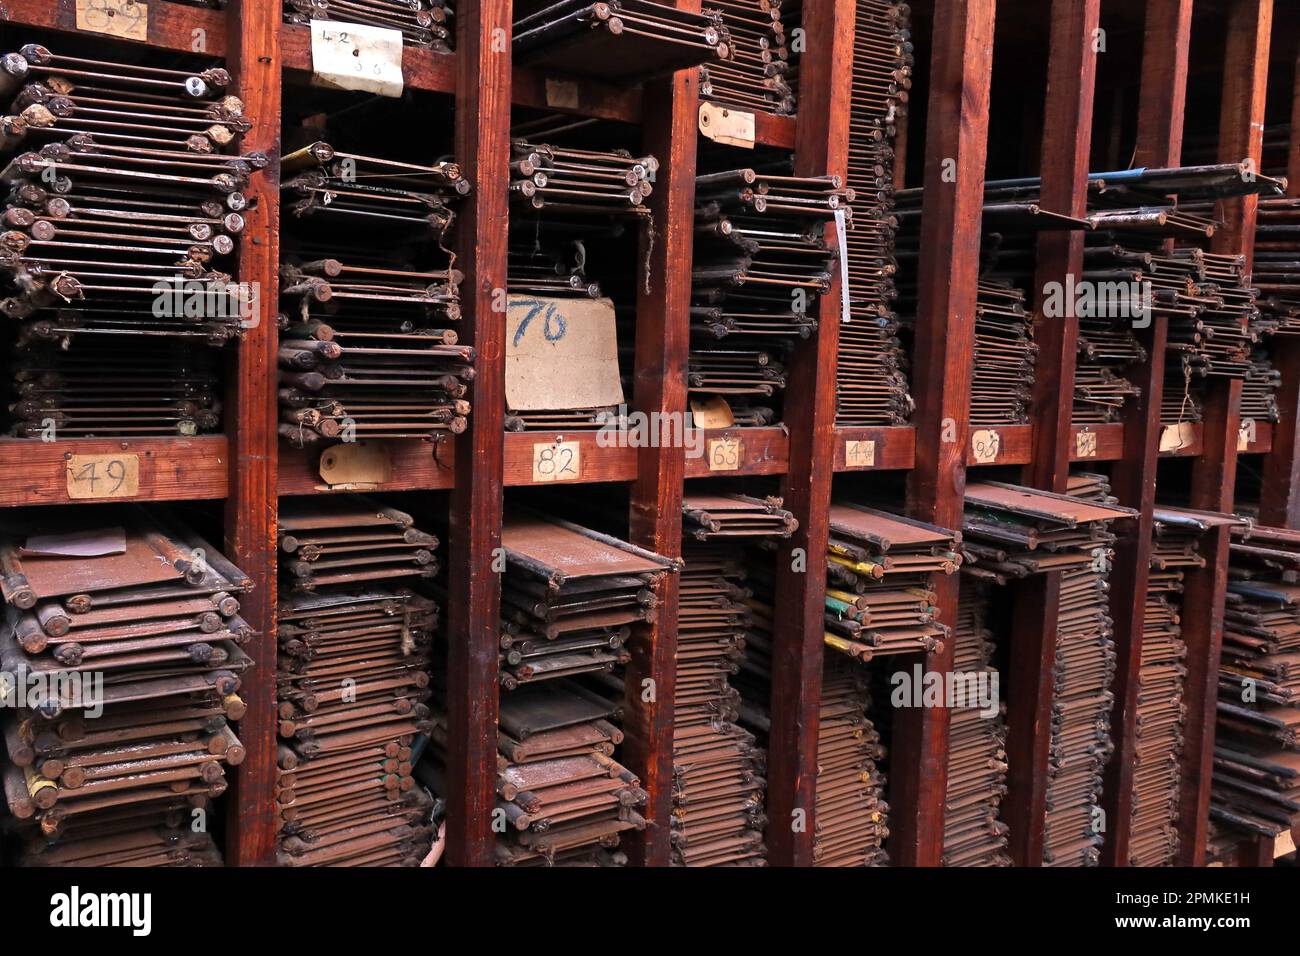 Weaving loom reeds of different lengths, stored in shelves, Cotton weaving mill, Burnley, Lancashire, England, UK, Stock Photo